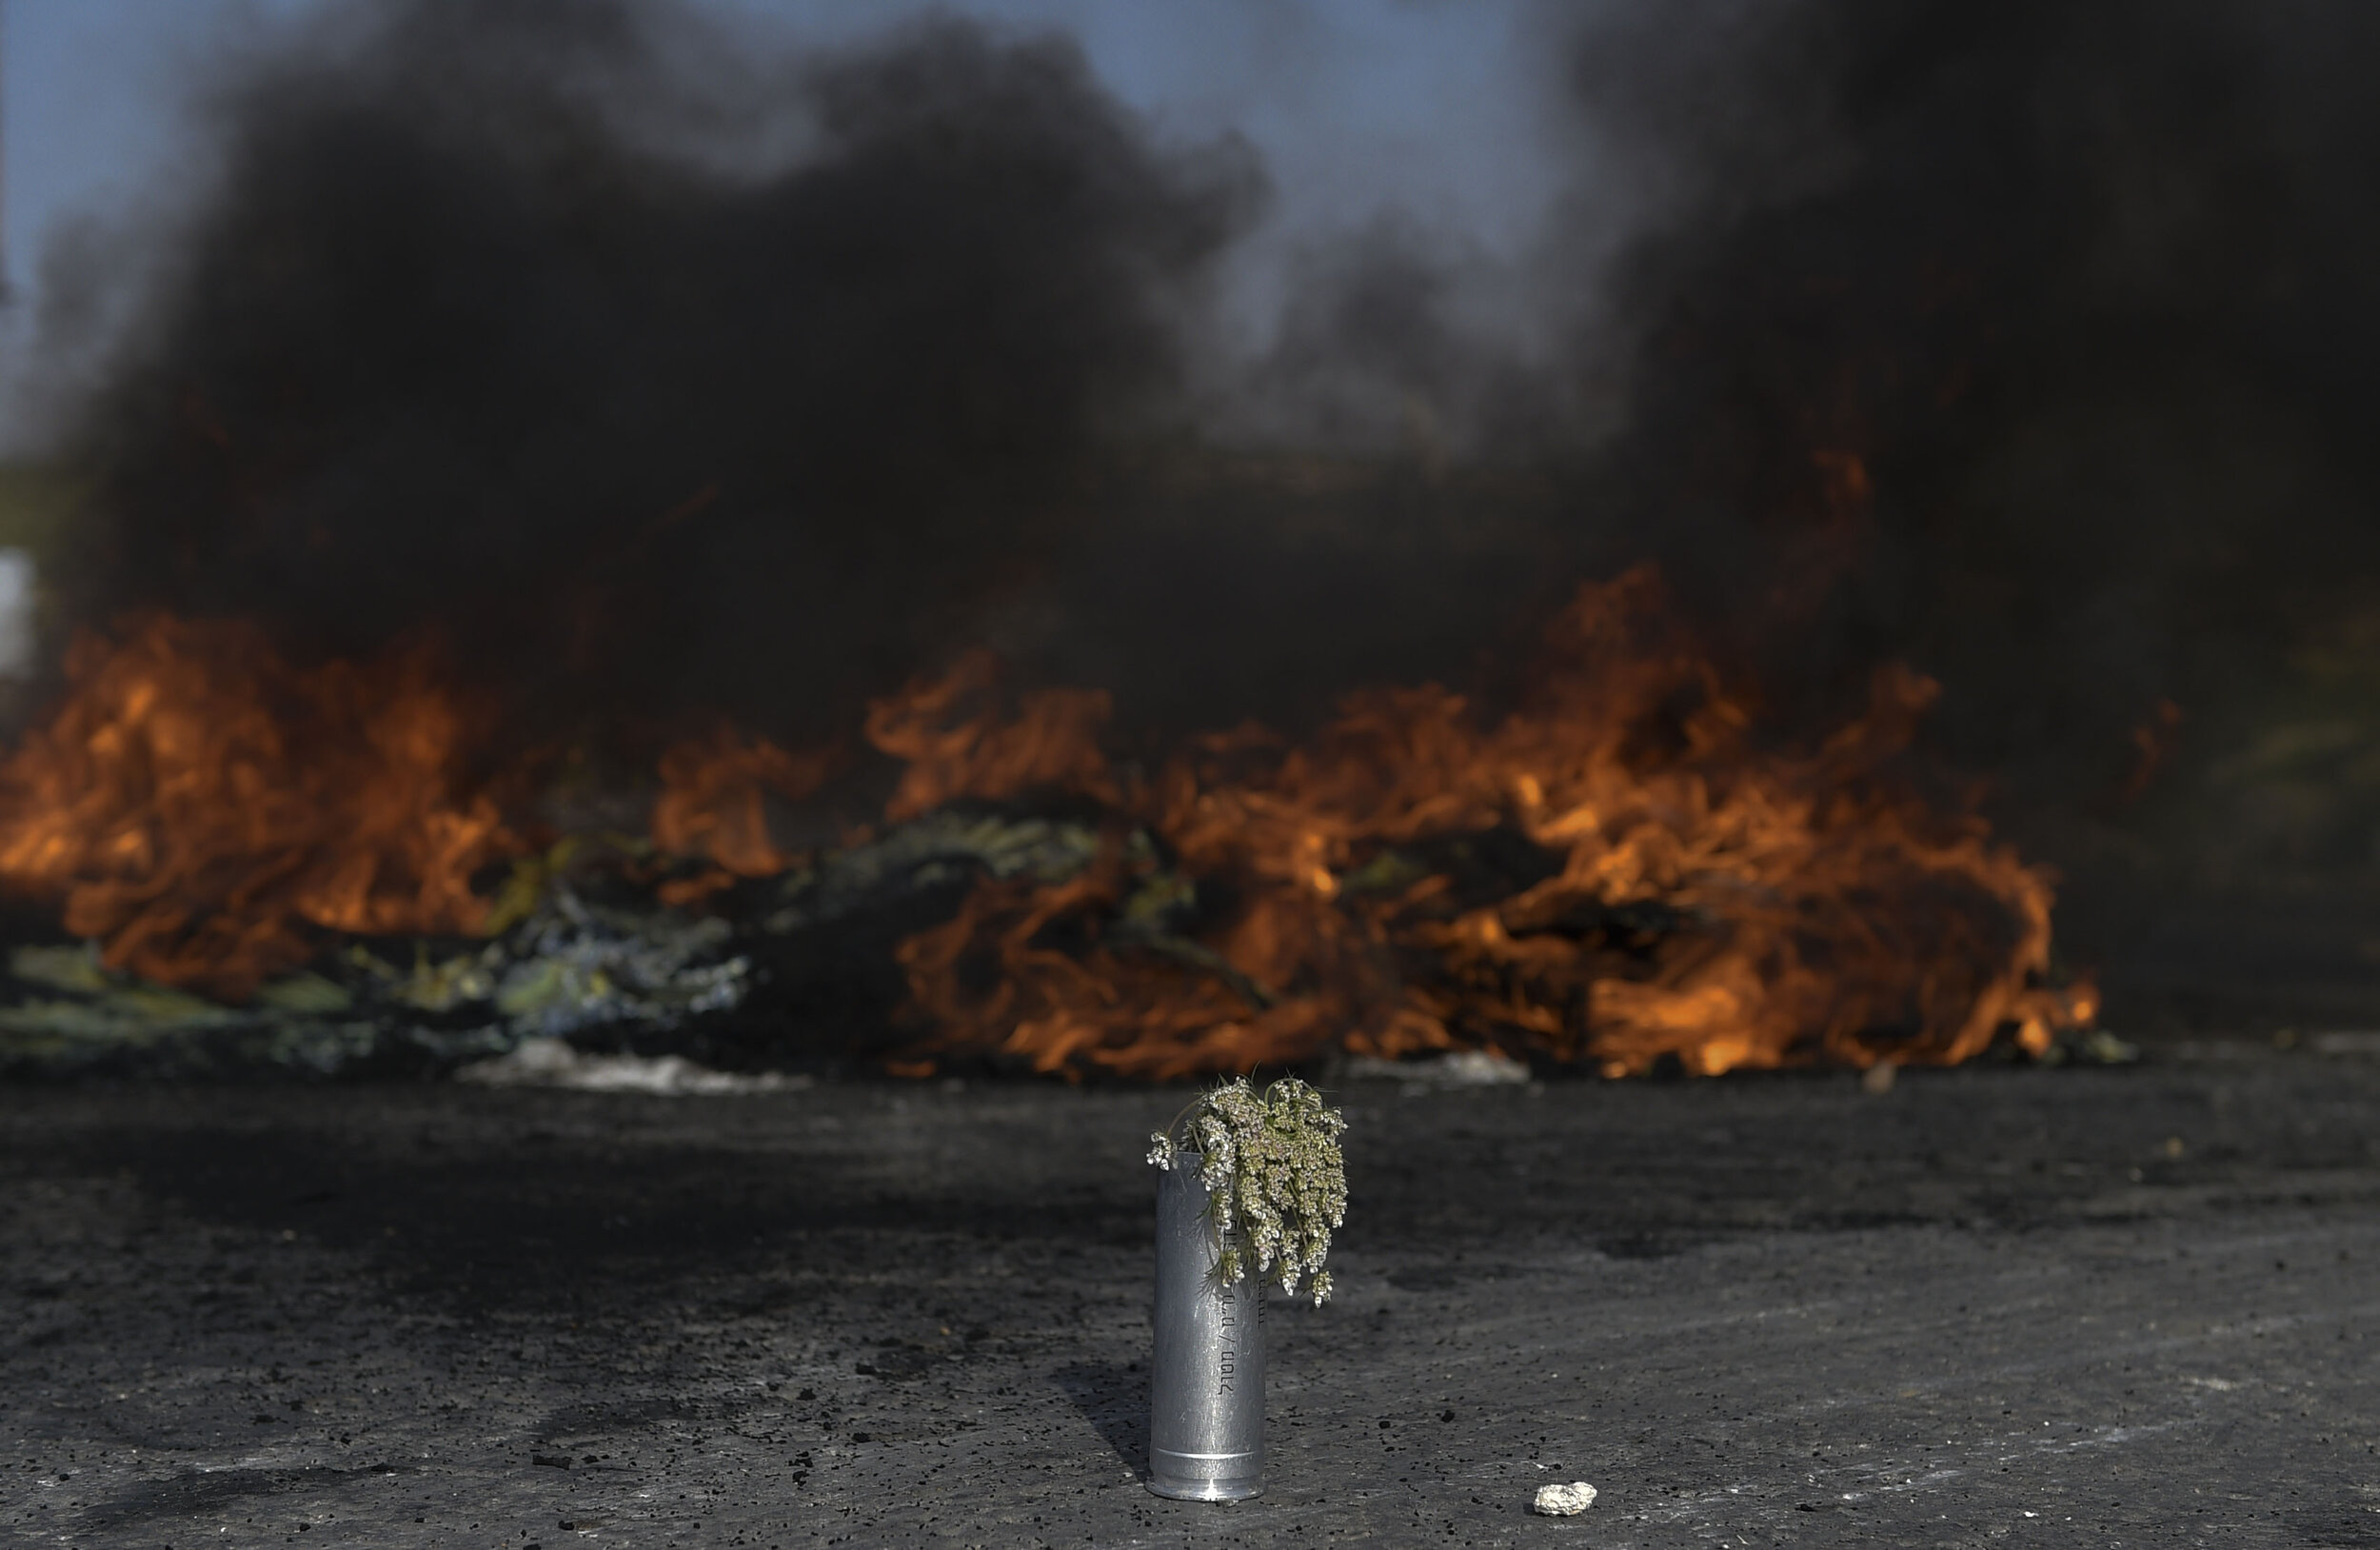  A teargas canister with flowers in it is placed in front of a tire fire during clashes at Beit-El in the Occupied West Bank. 